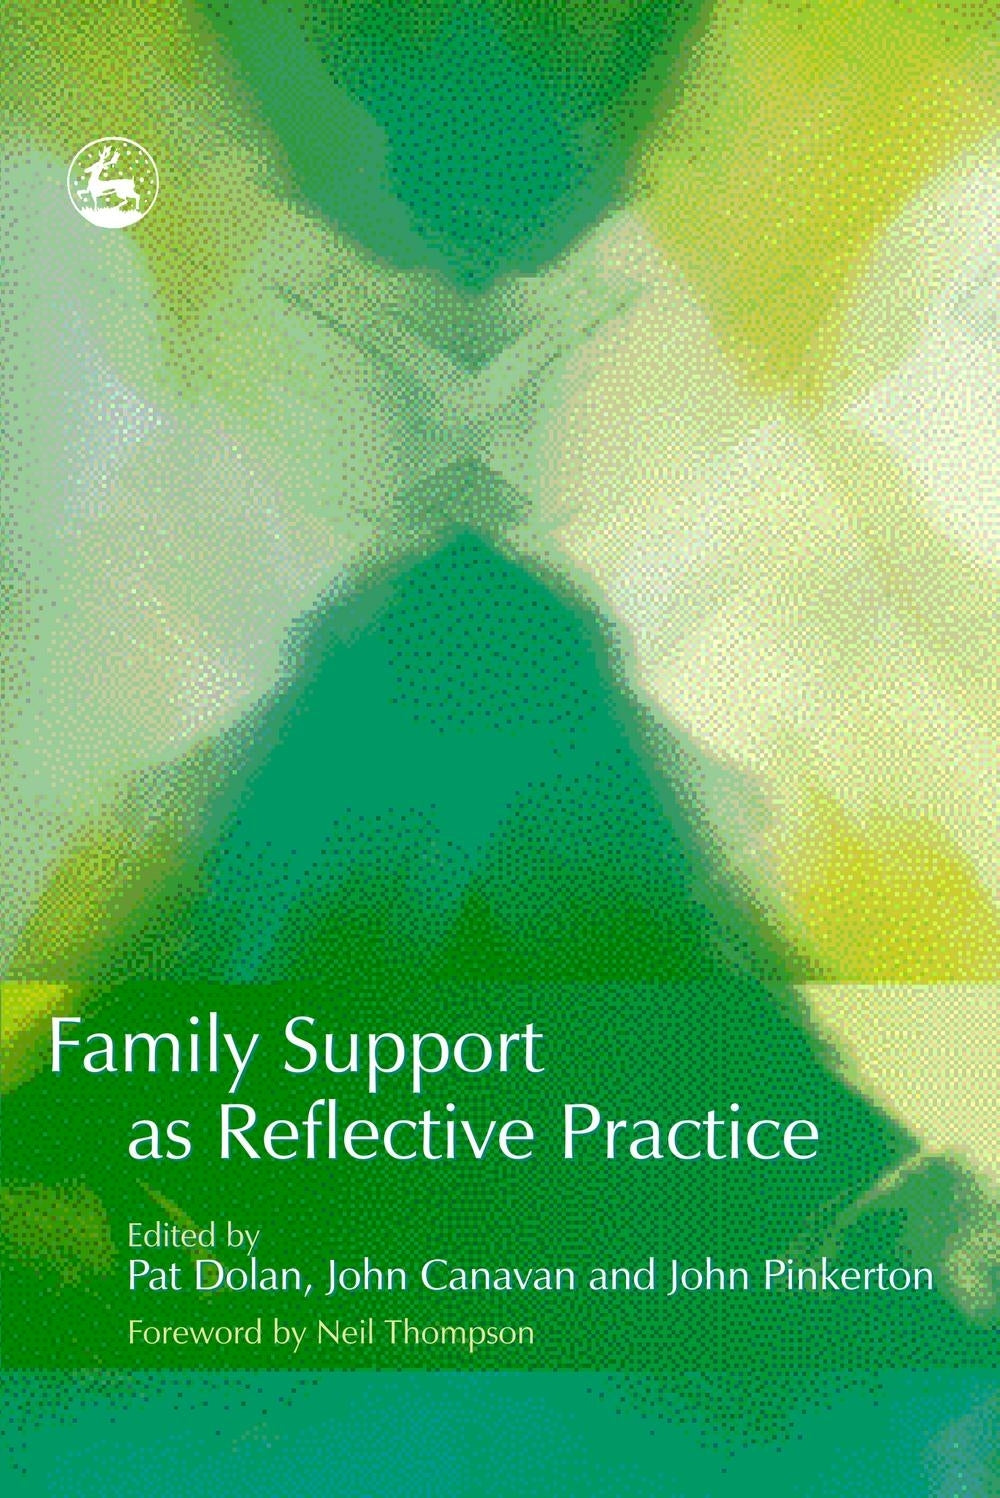 Family Support as Reflective Practice by Neil Thompson, John Canavan, John Pinkerton, Pat Dolan, No Author Listed